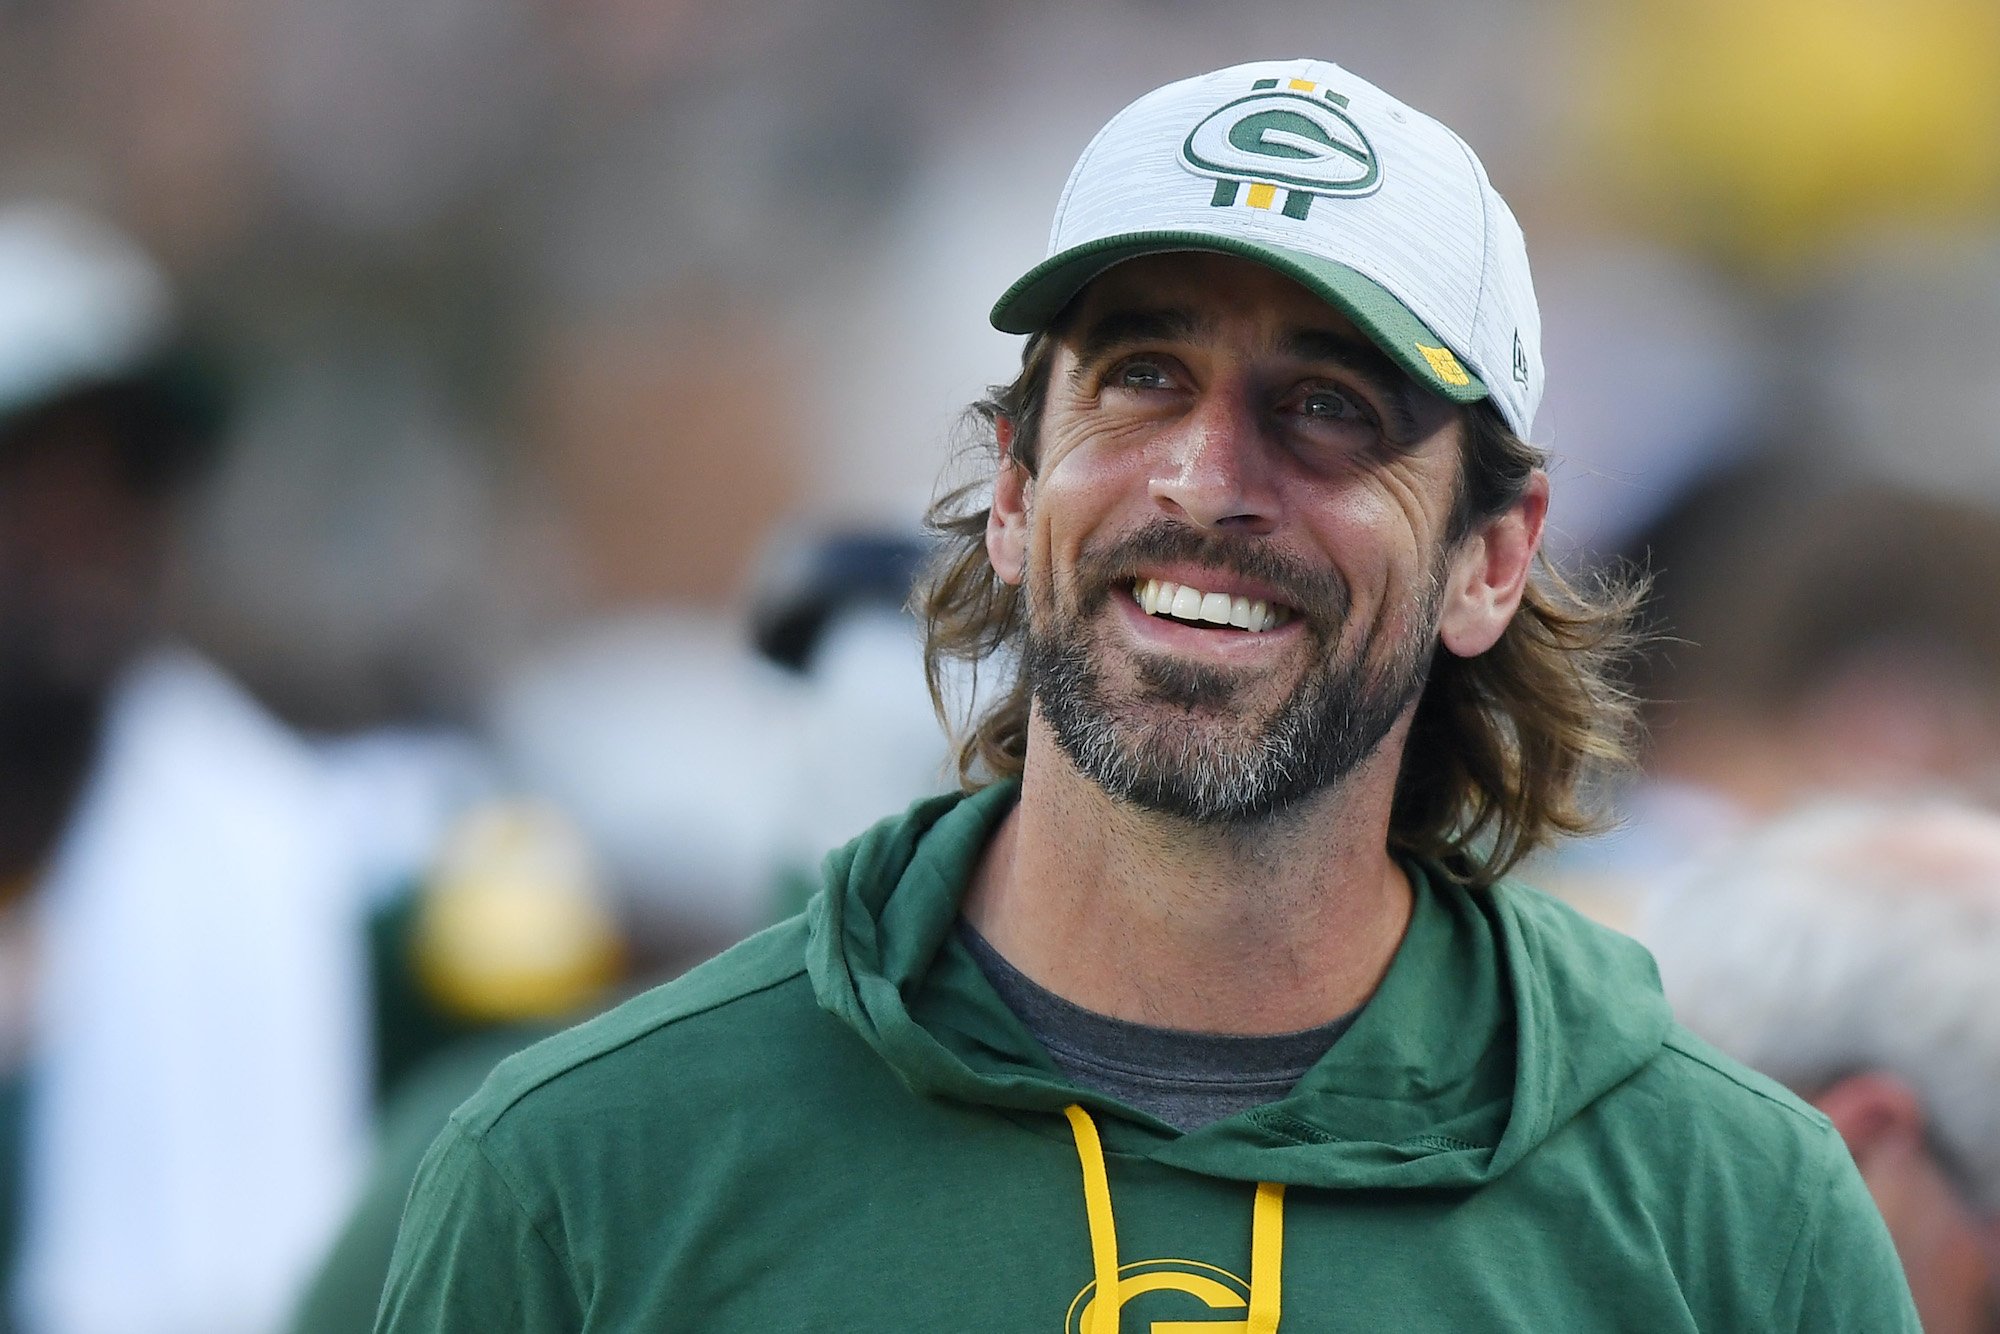 Aaron Rodgers smiling in front of a blurred crowd